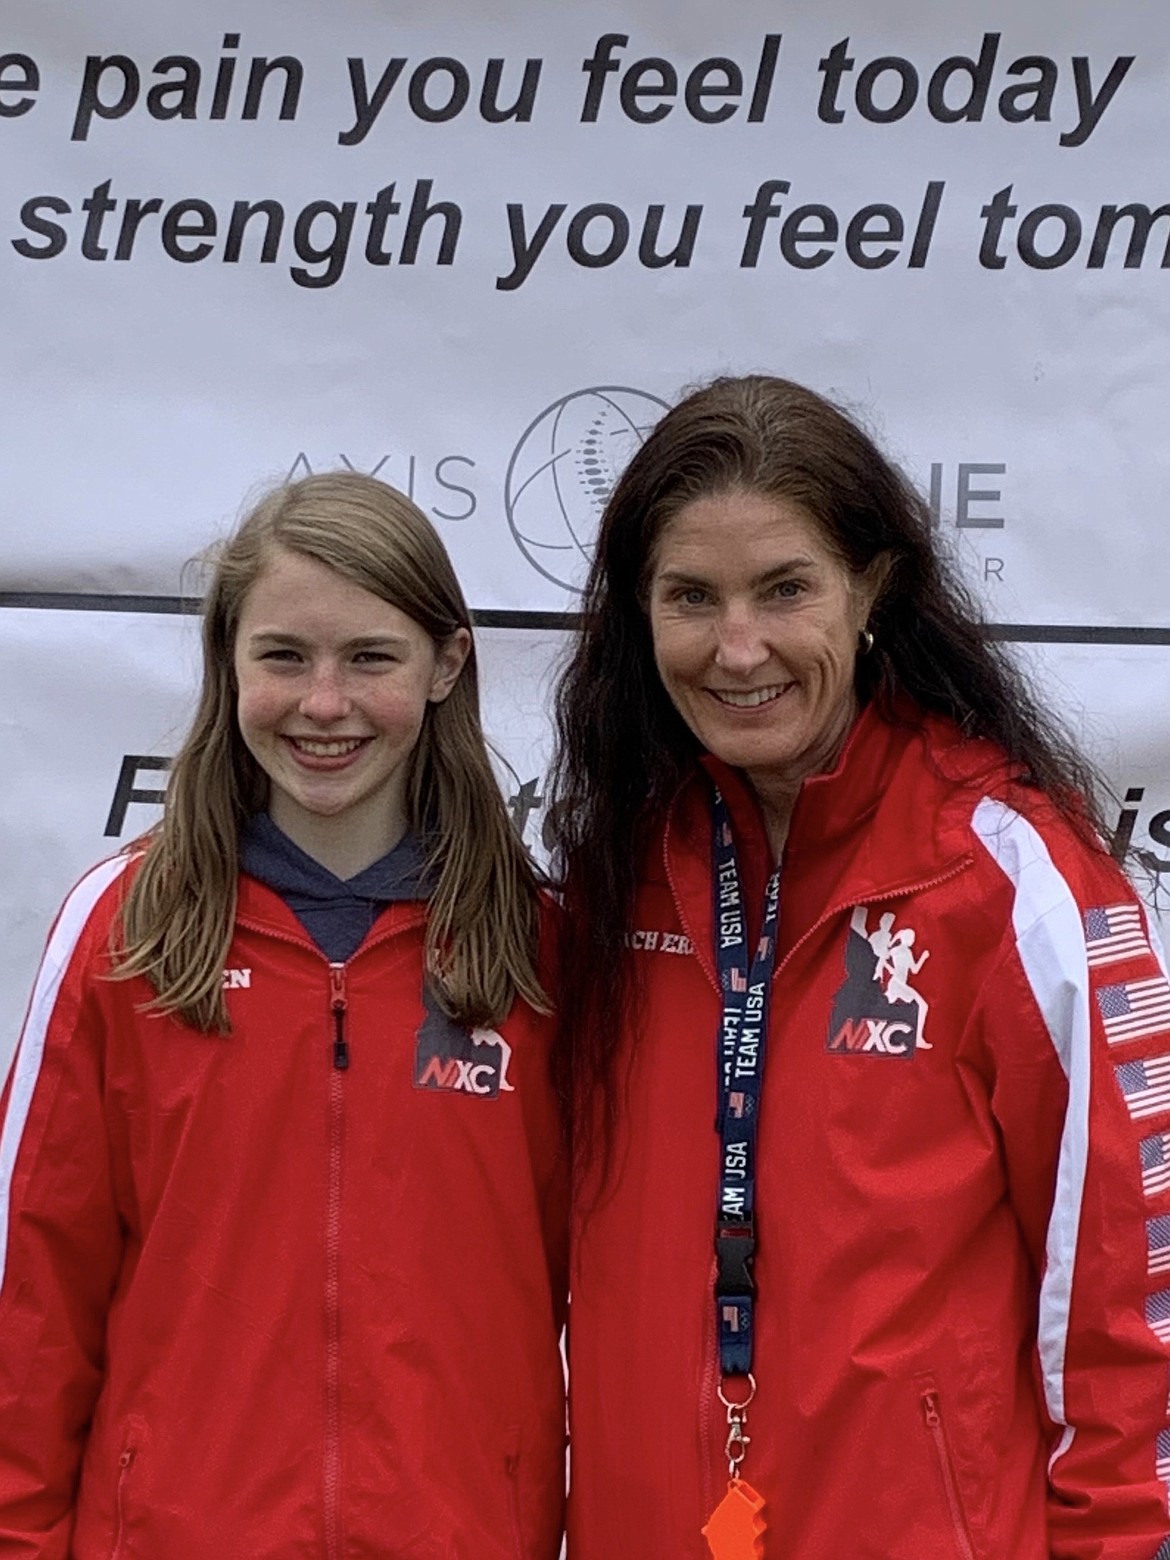 Courtesy photo
Helen Oyler of the North Idaho Cross Country team placed third in the girls age 11-12 race at the USATF National Junior Olympic Cross Country Championships in Paris, Ky., on Dec. 12-13. Pictured is Helen Oyler, left, and NIXC coach Erin Lydon Hart.